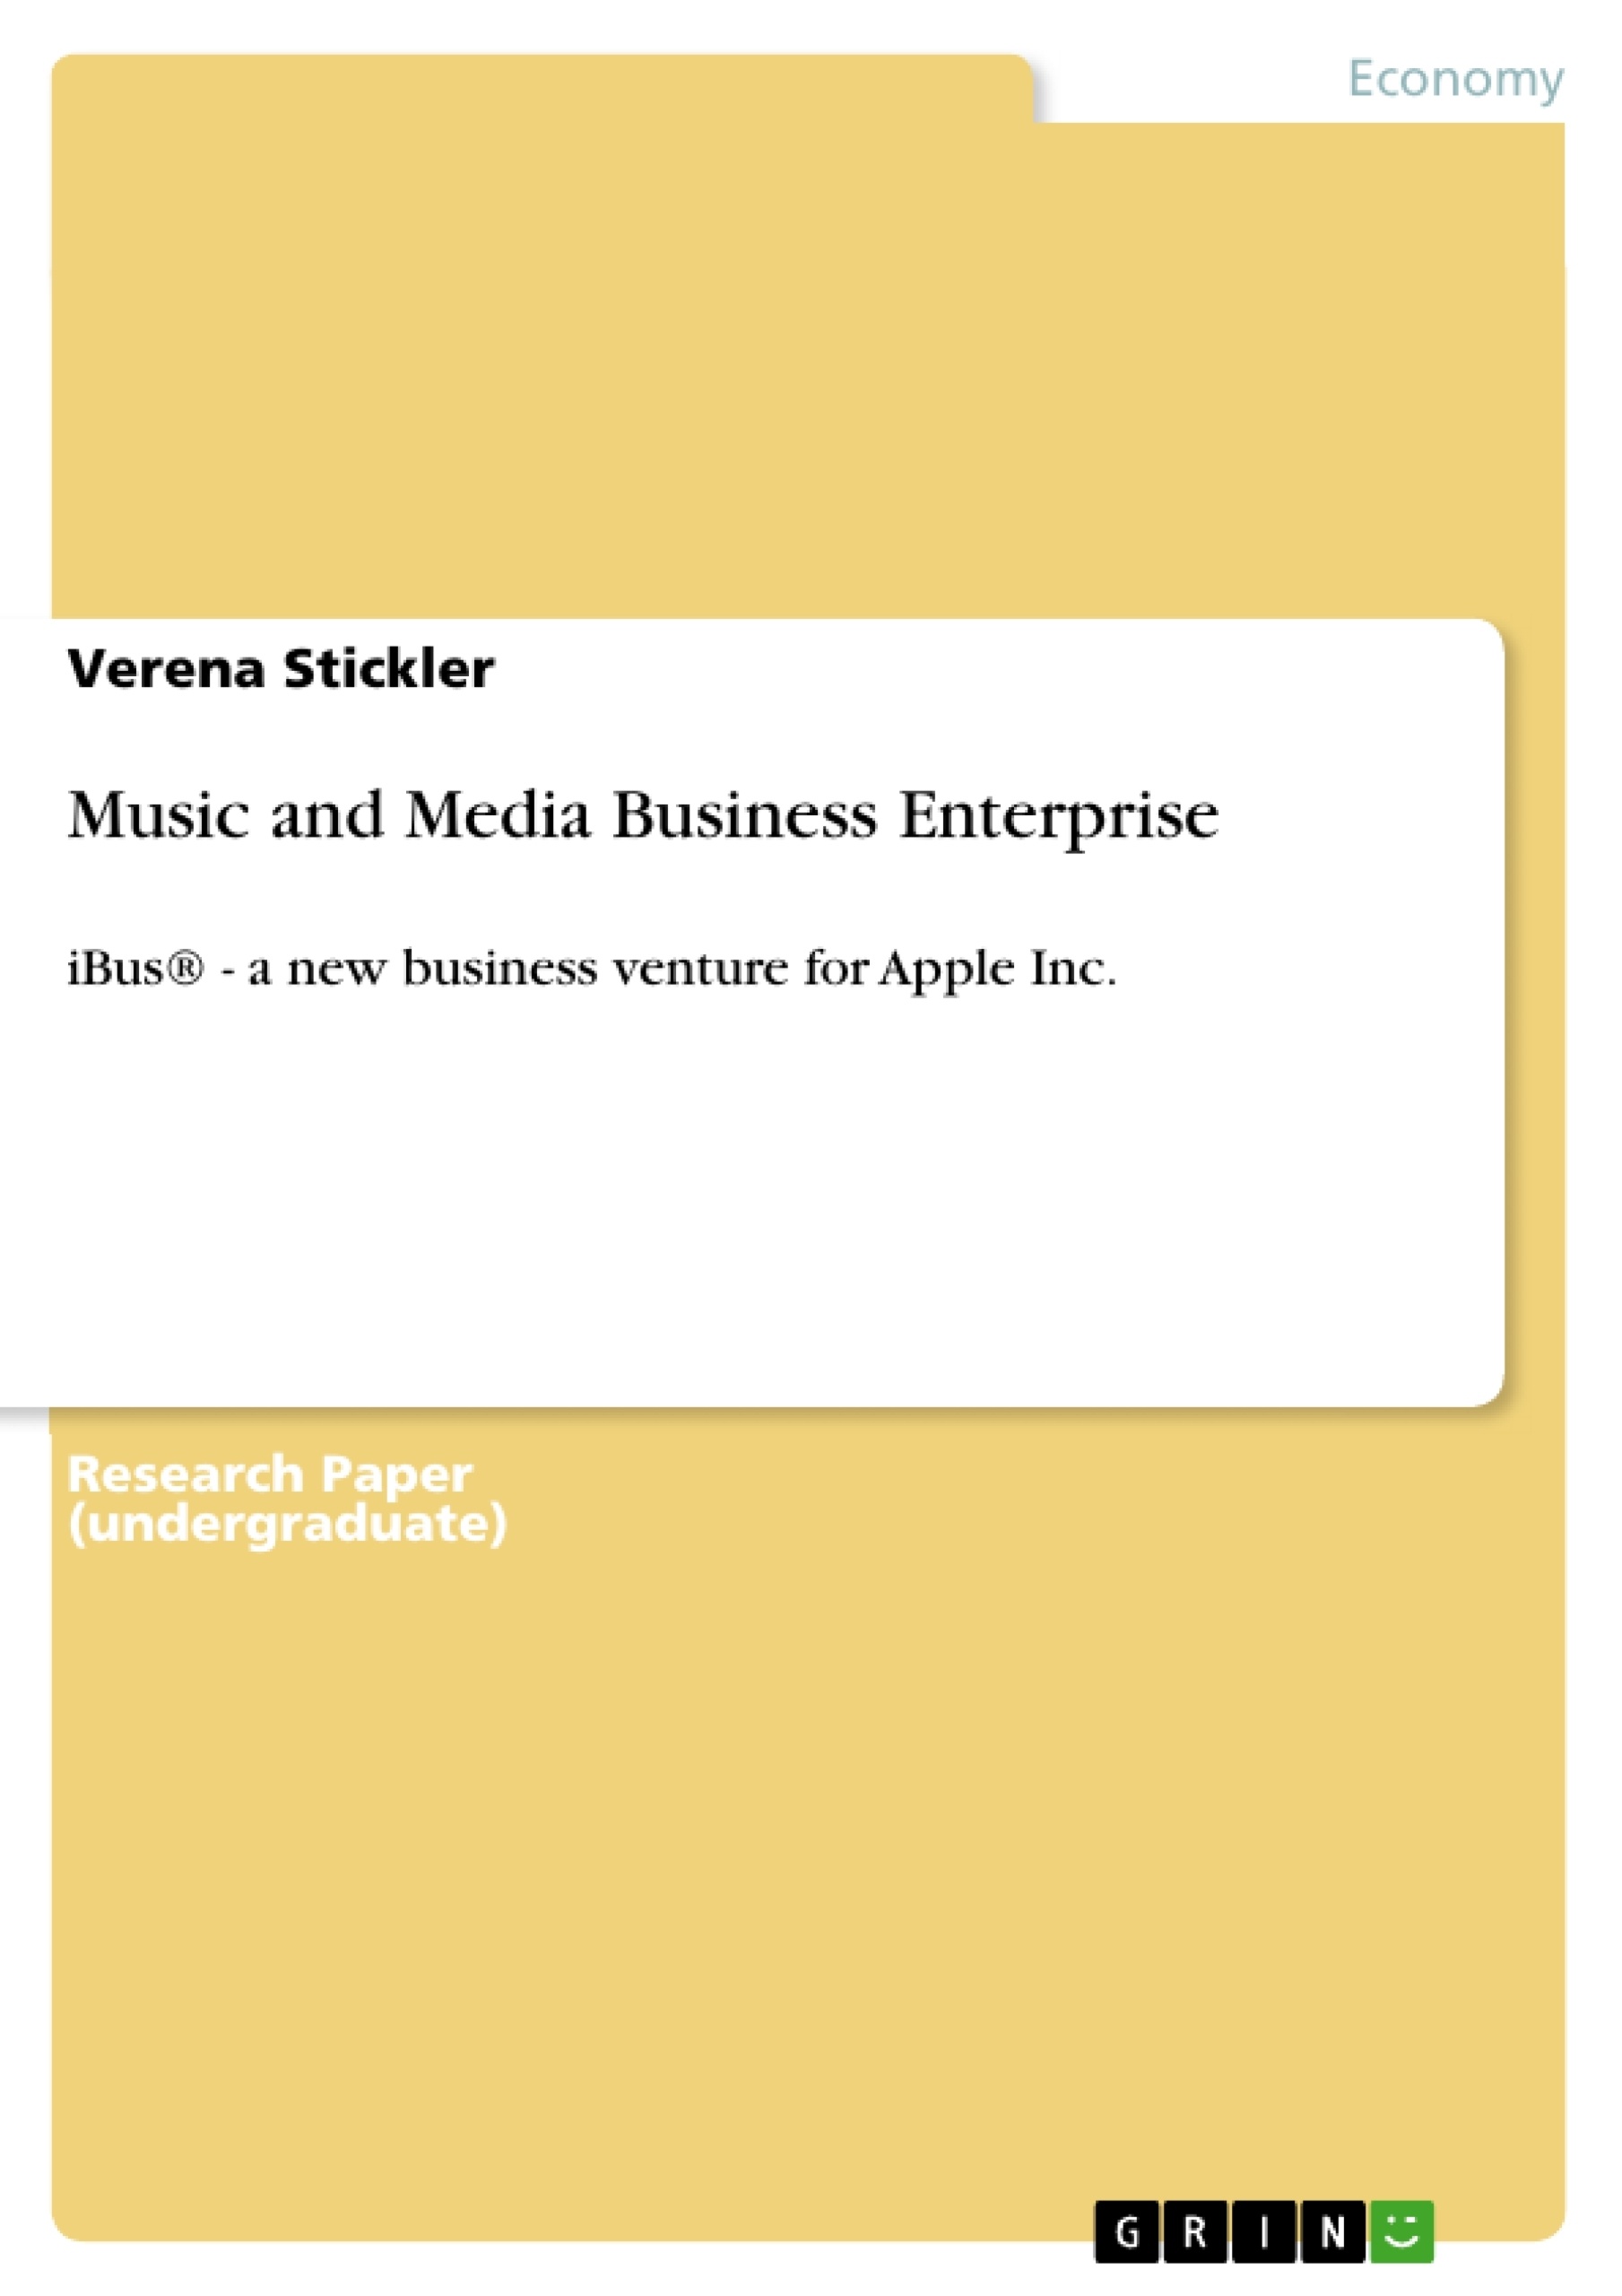 Título: Music and Media Business Enterprise